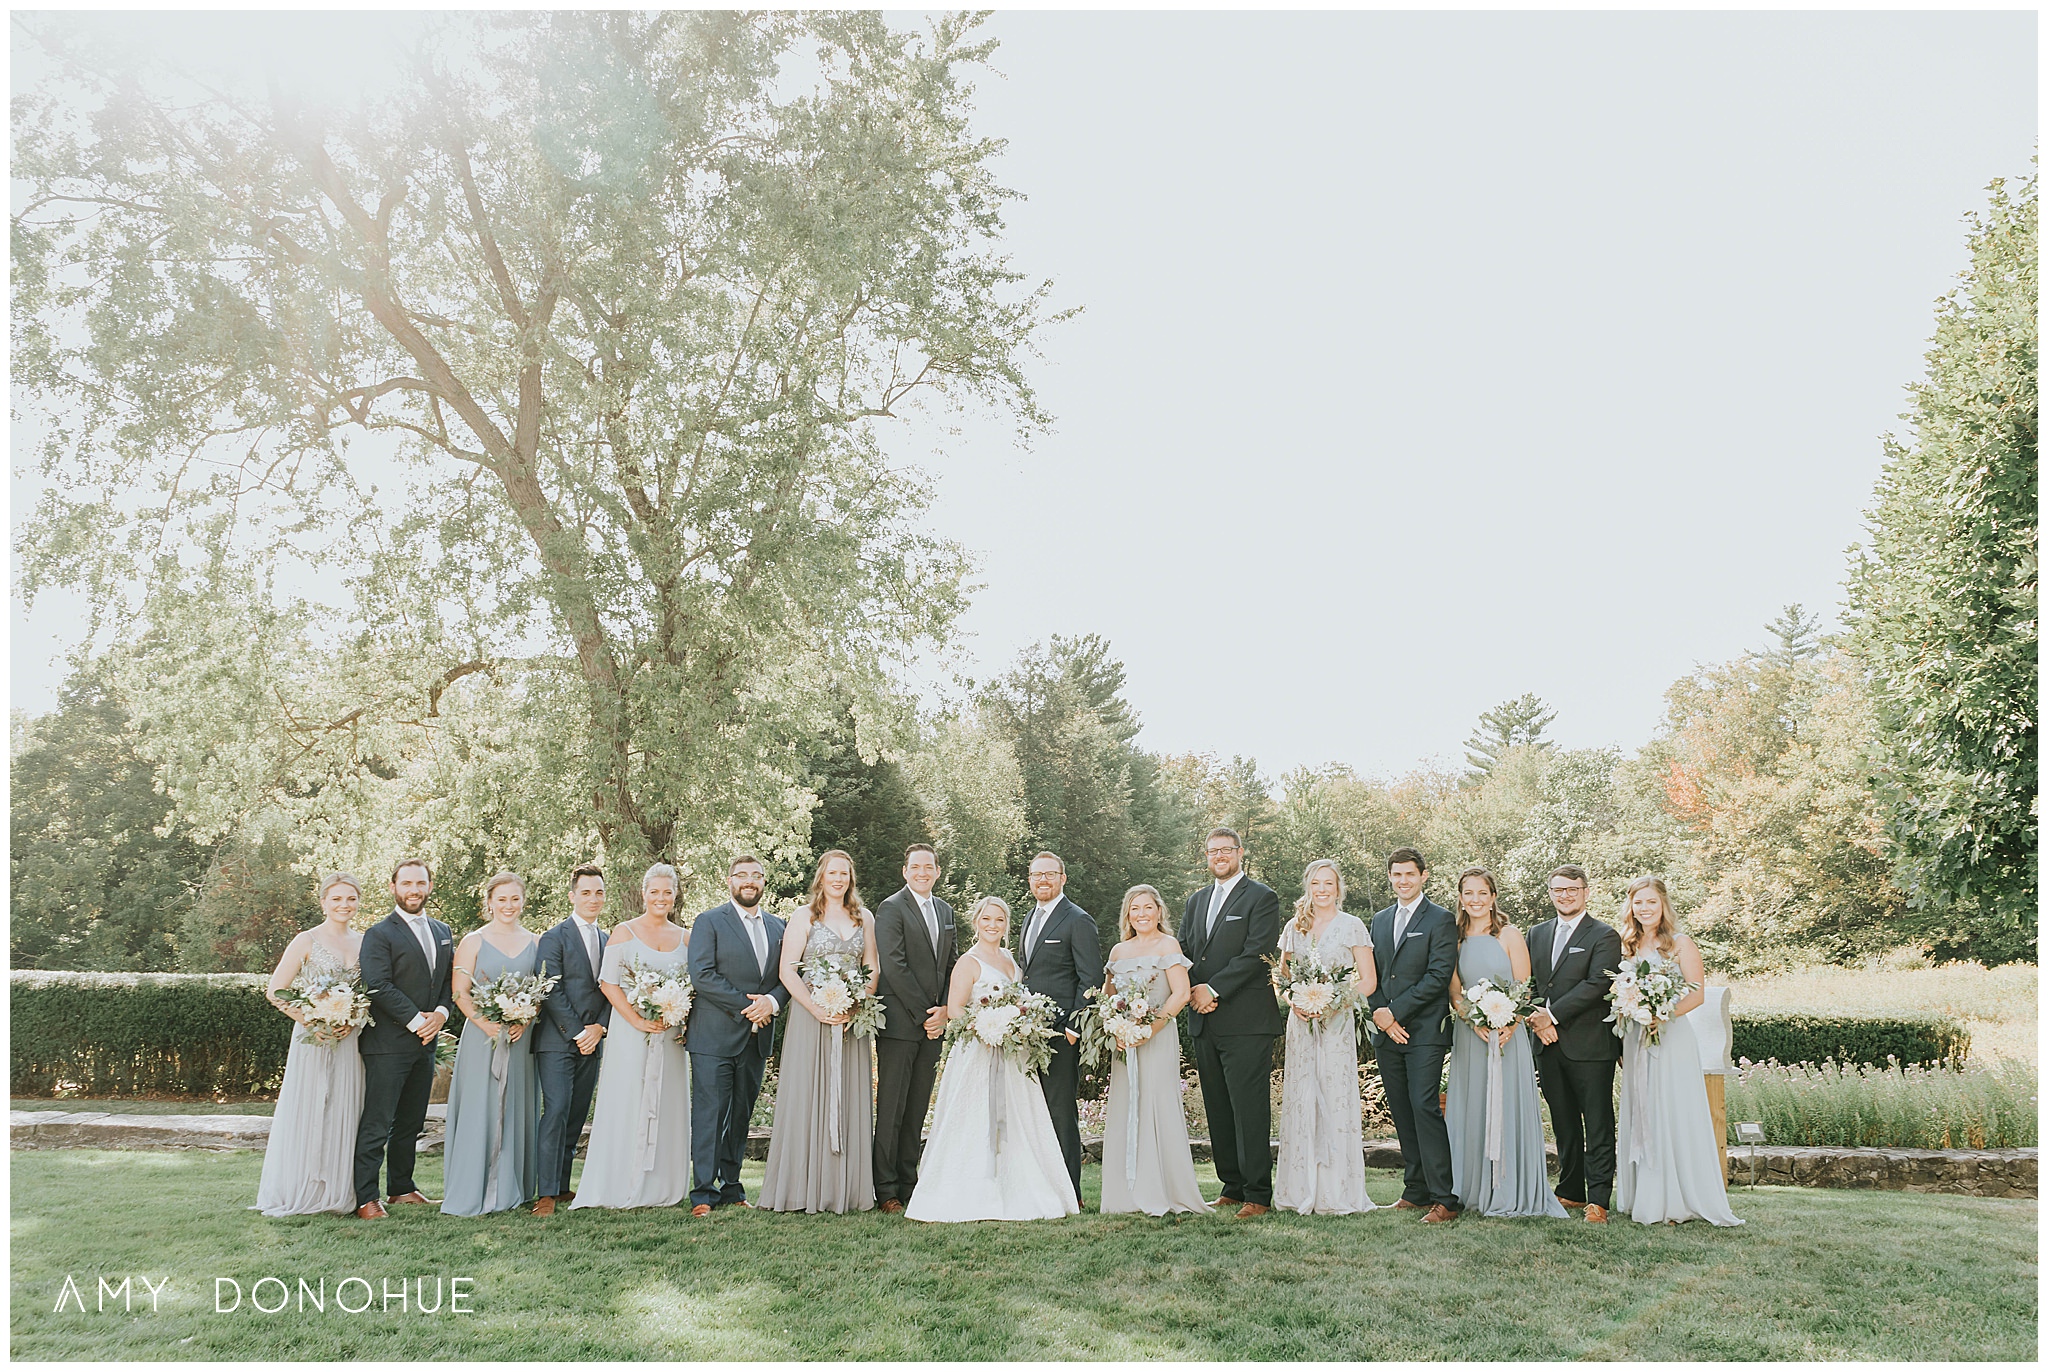 Wedding Party Portraits | The Fells Estate | The Prism House Event Design & Wedding Planning | New Hampshire Wedding Photographer | © Amy Donohue Photography